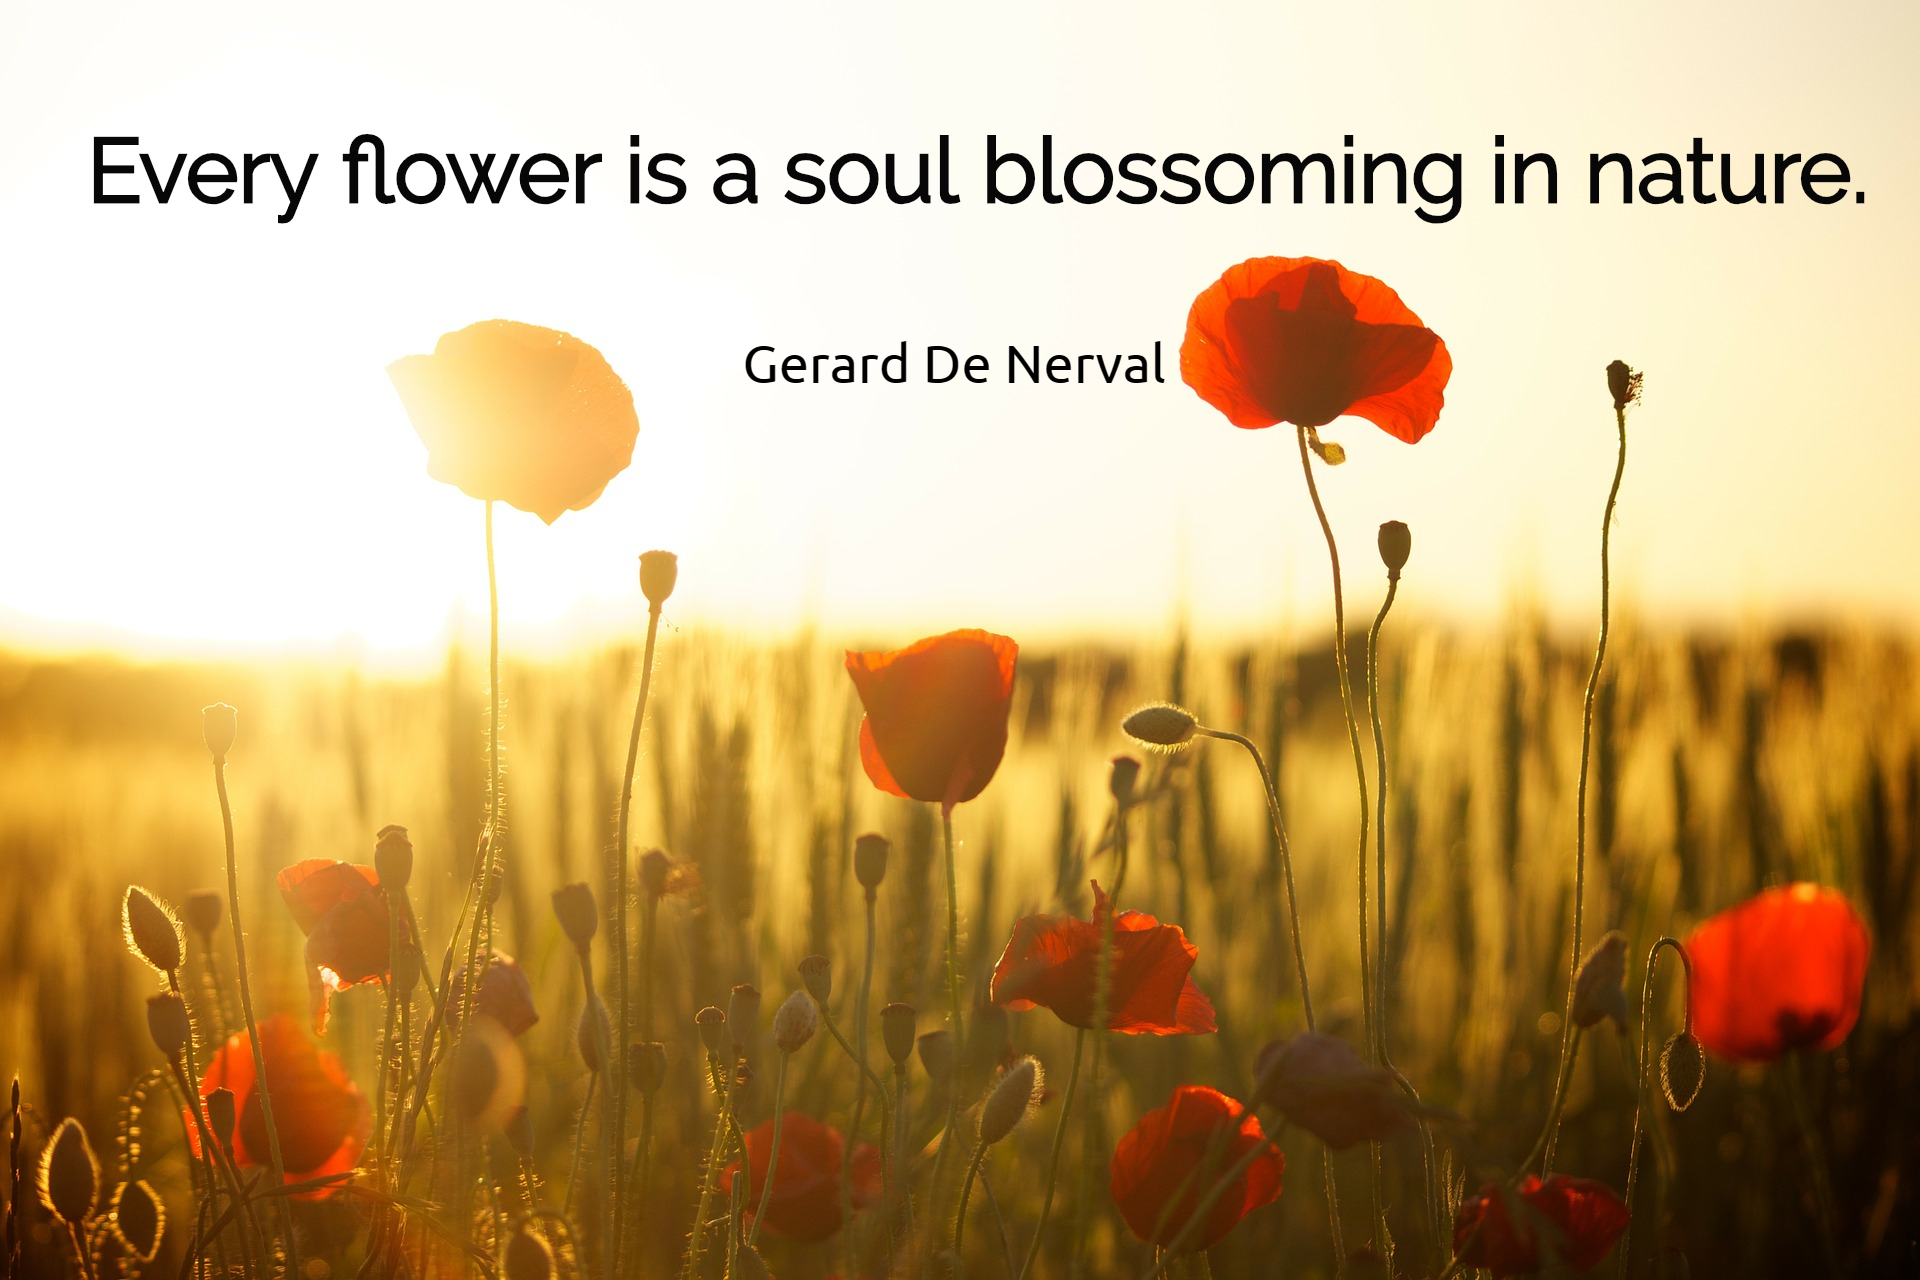 Every flower is a soul blossoming in nature; Gerard De Nerval: